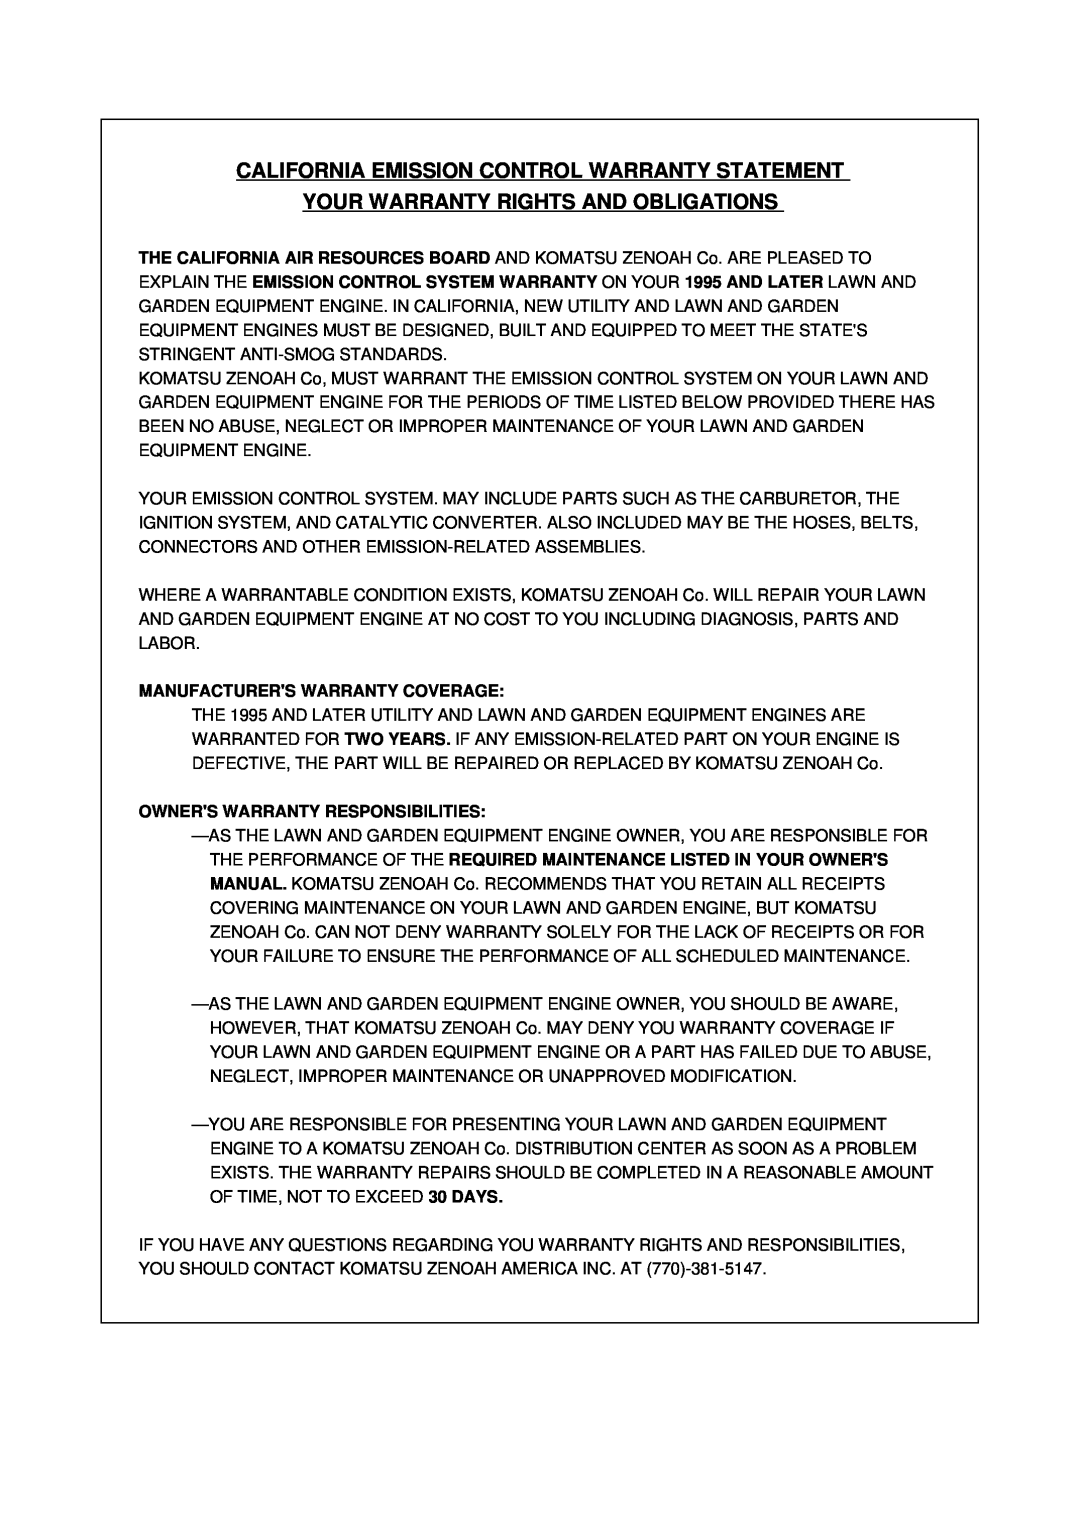 RedMax LRT2300 manual California Emission Control Warranty Statement, Your Warranty Rights And Obligations 